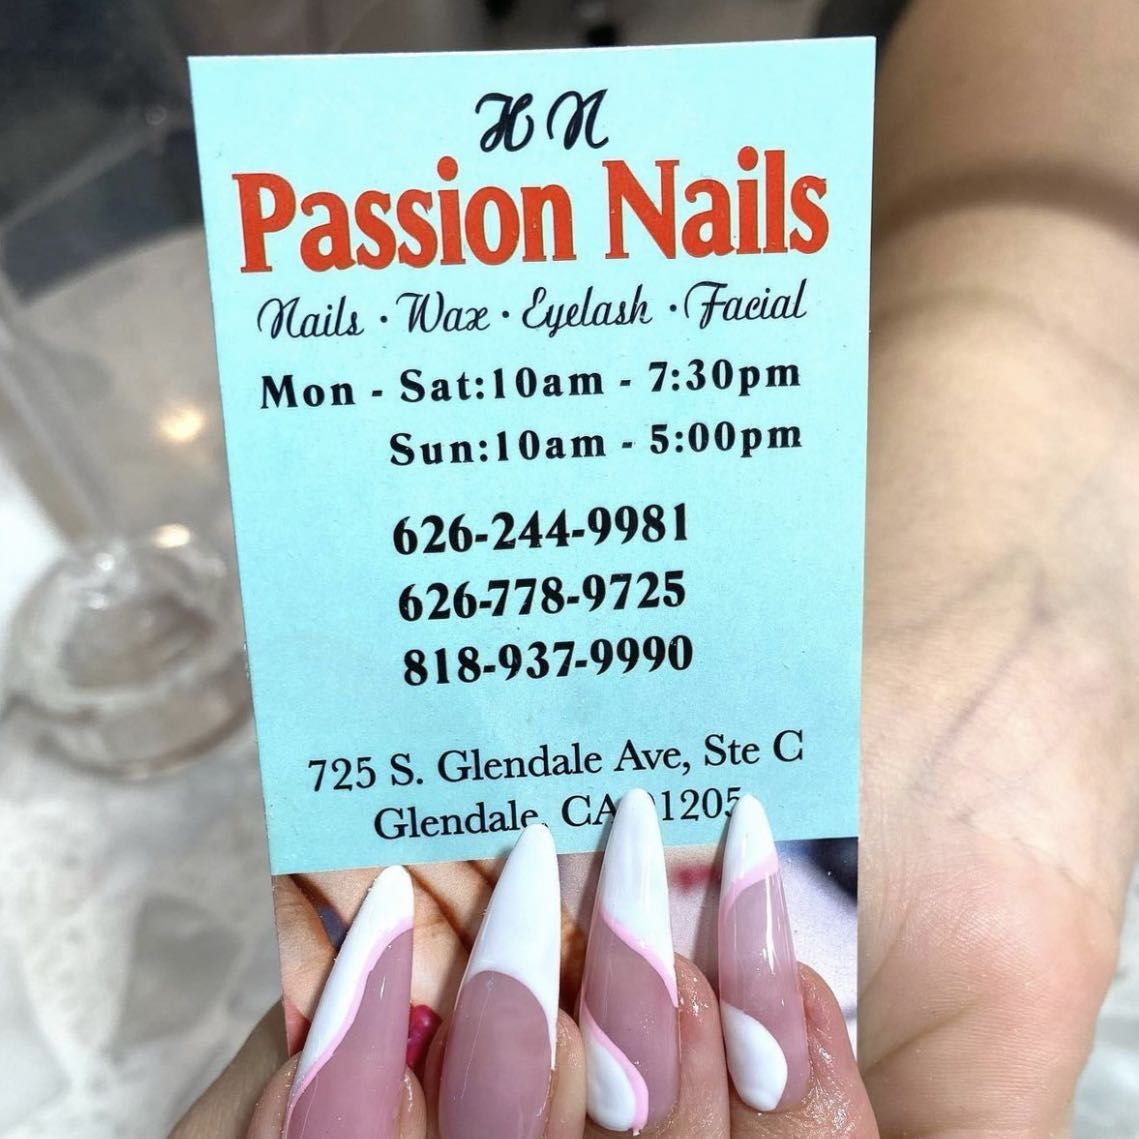 HN Passion Nails: Read Reviews and Book Classes on ClassPass